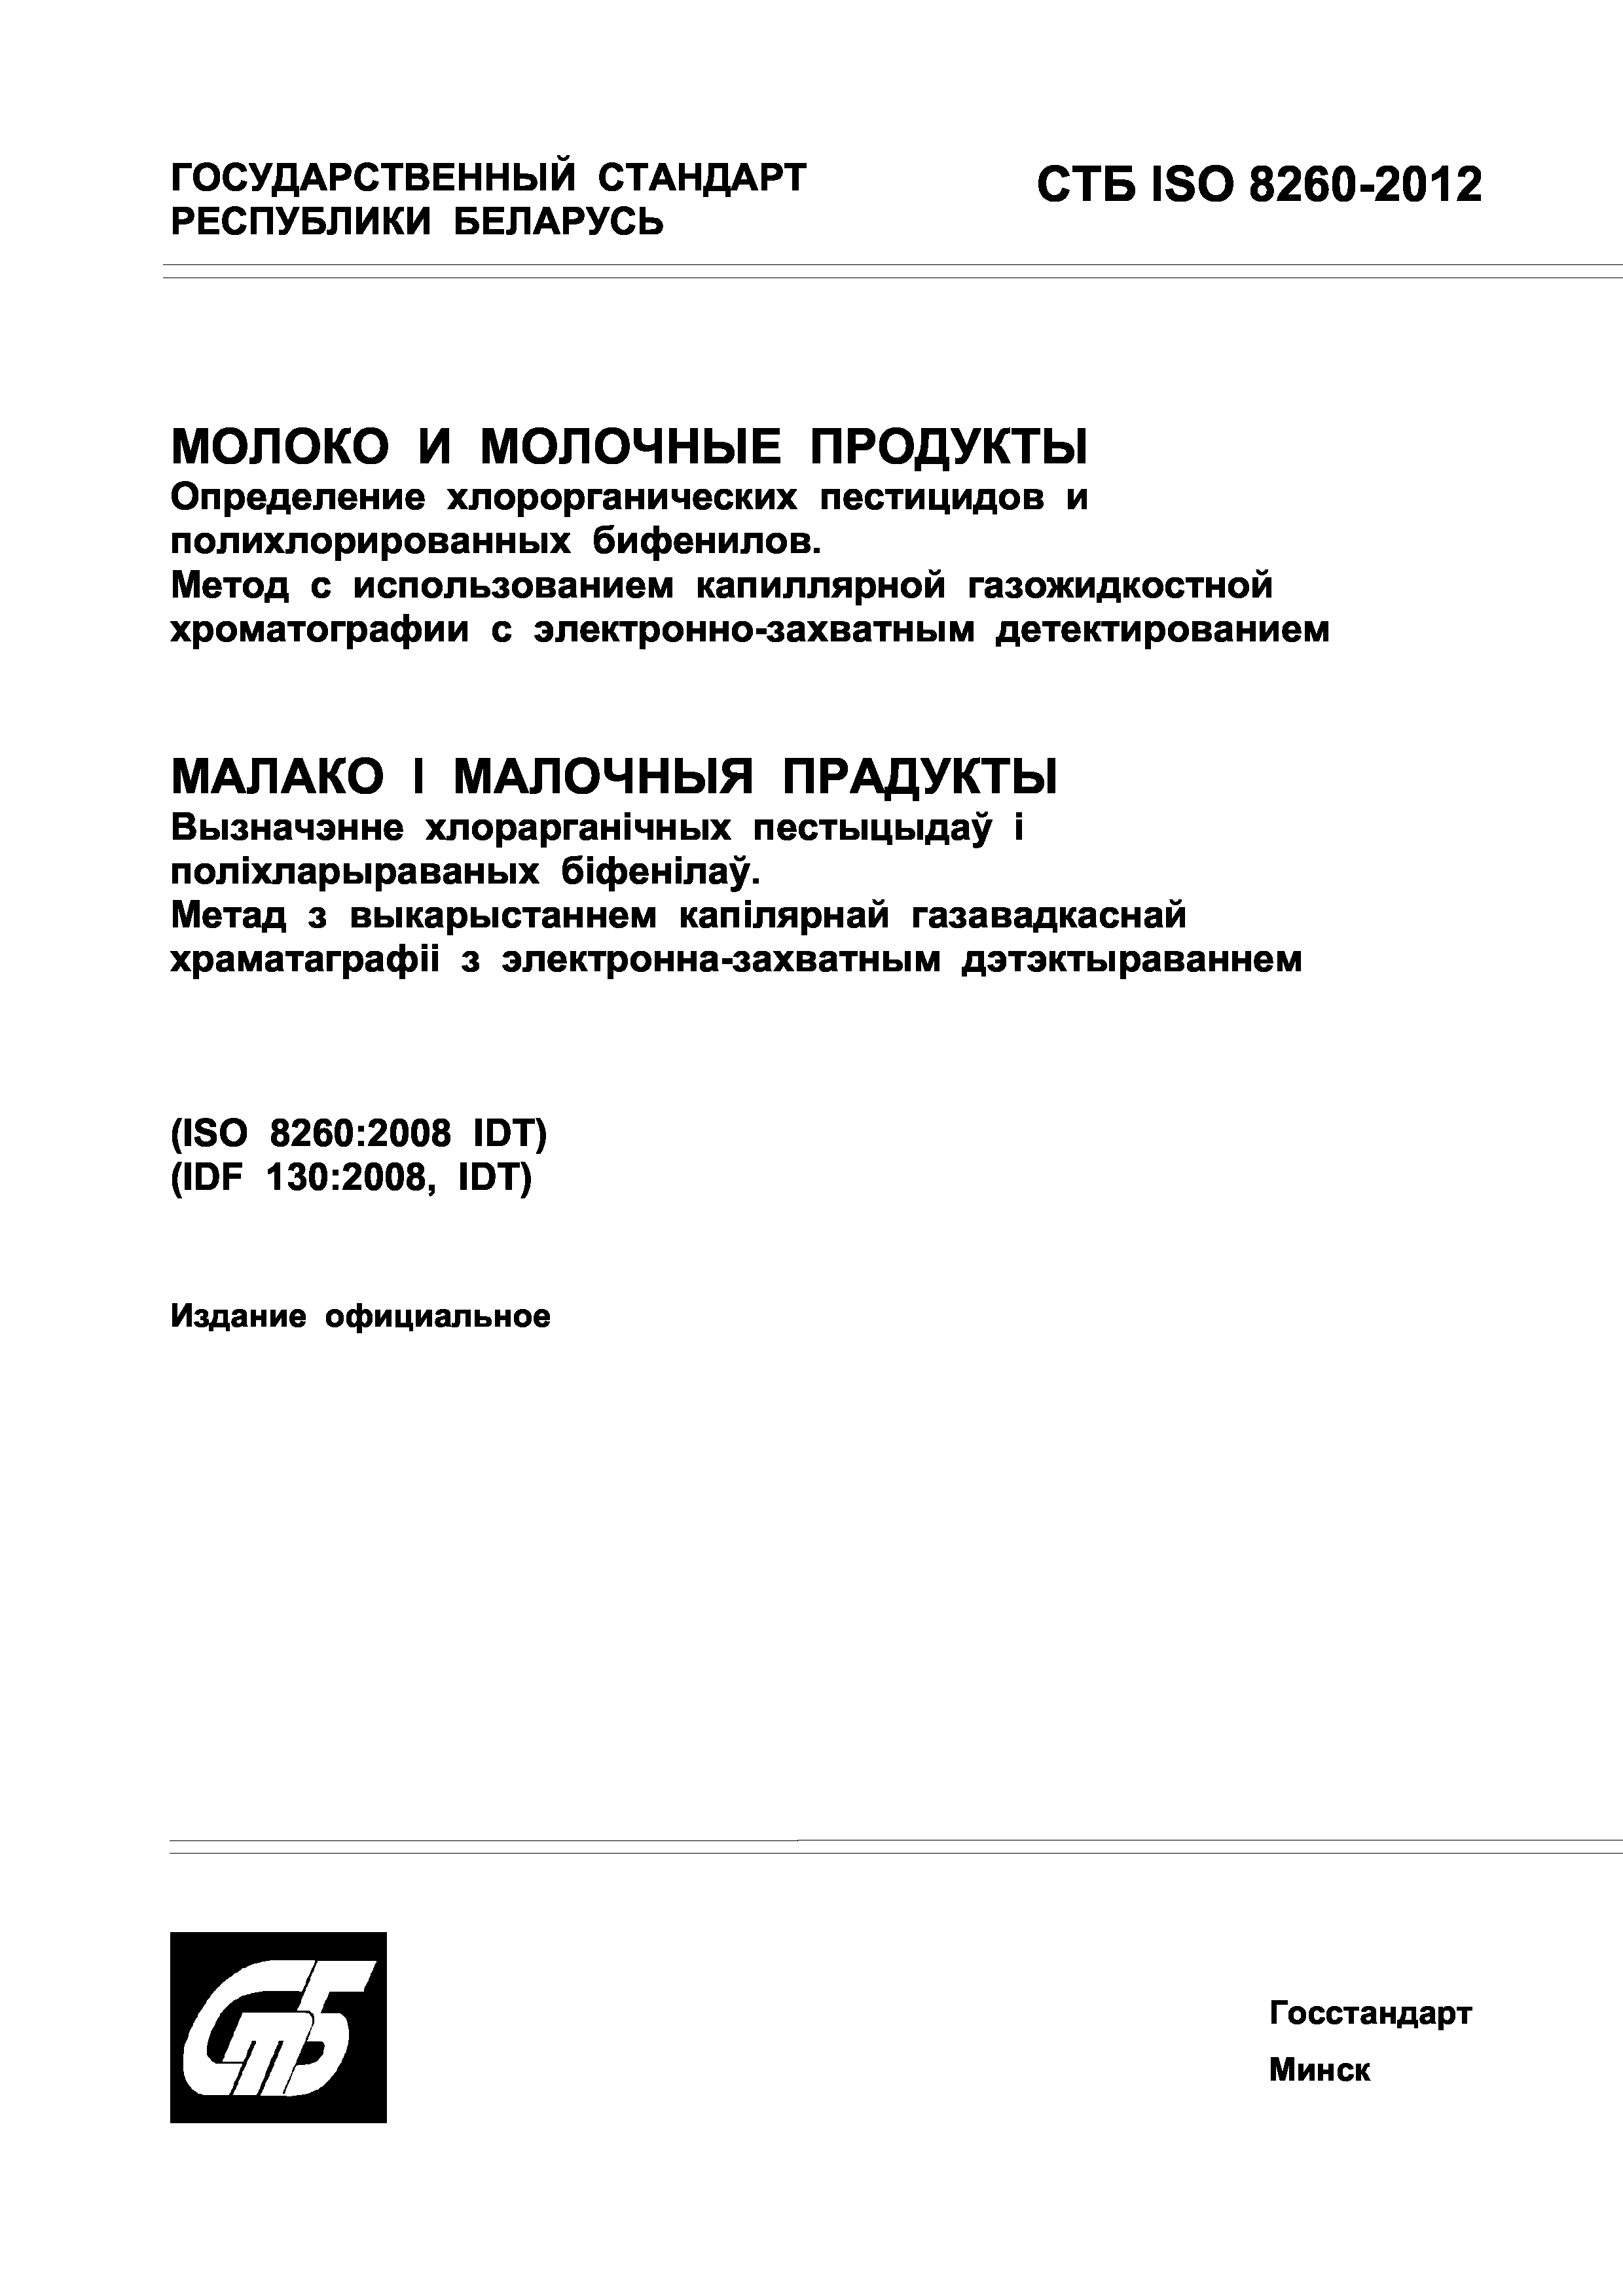 СТБ ISO 8260-2012